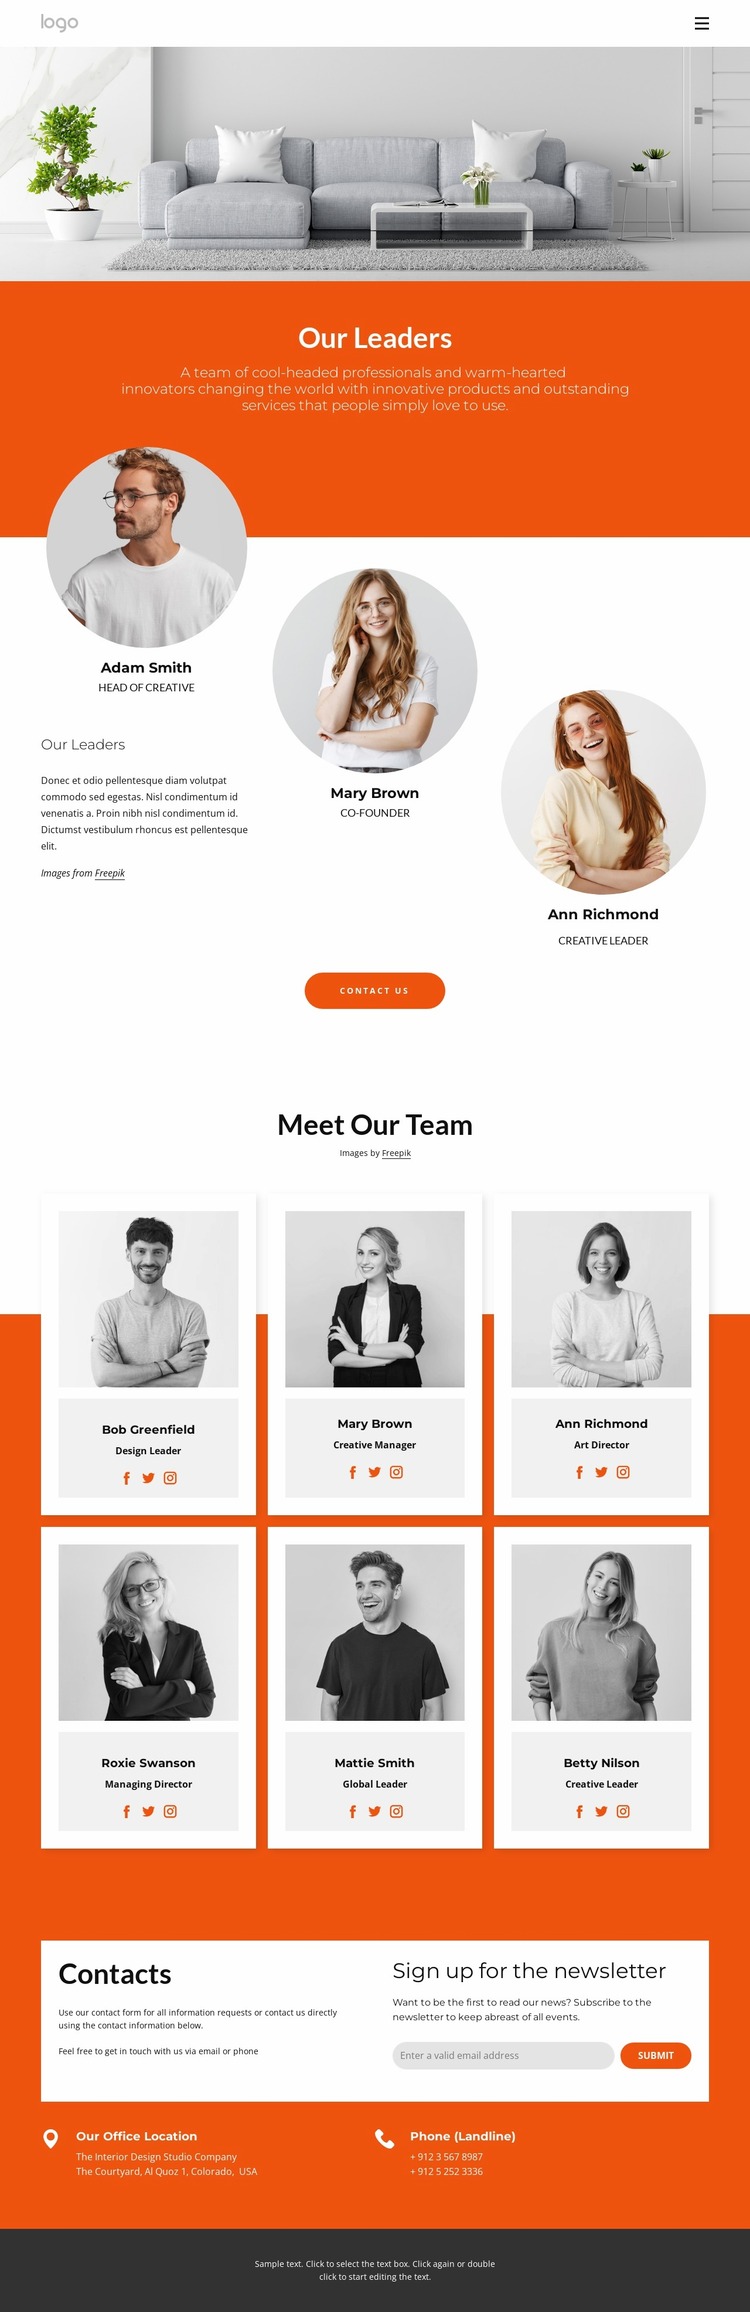 Our great team Website Mockup